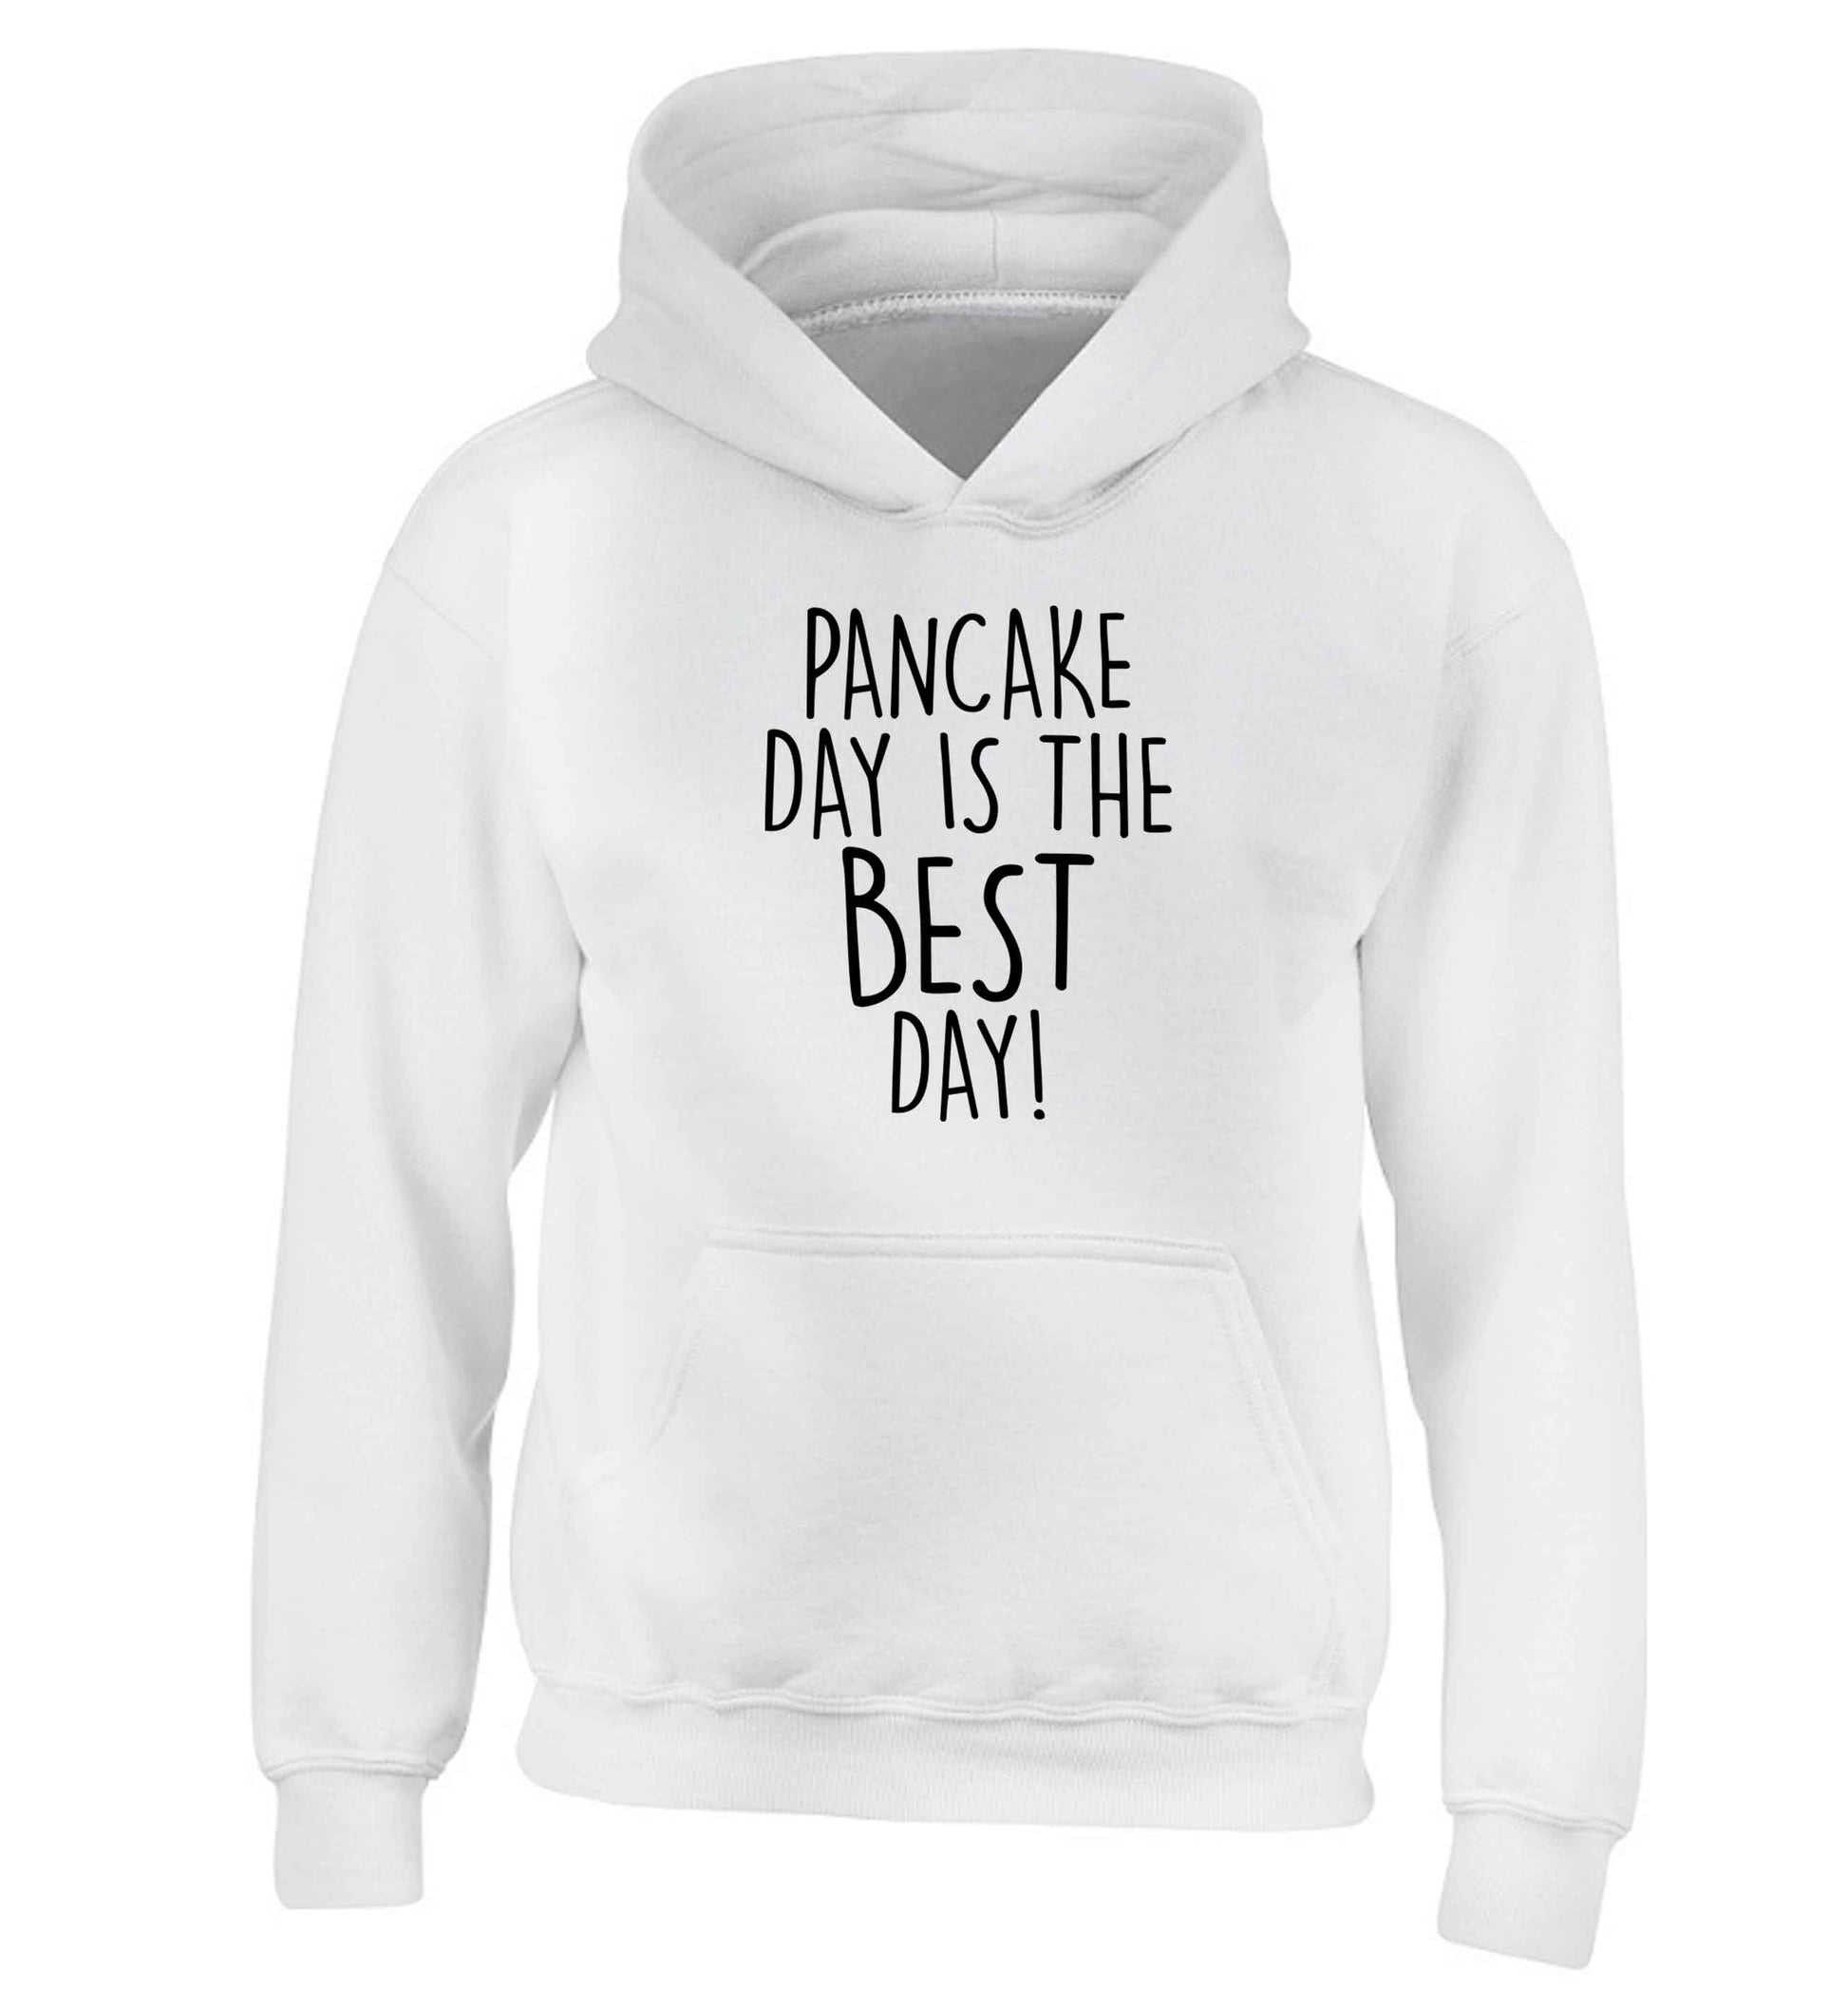 Pancake day is the best day children's white hoodie 12-13 Years